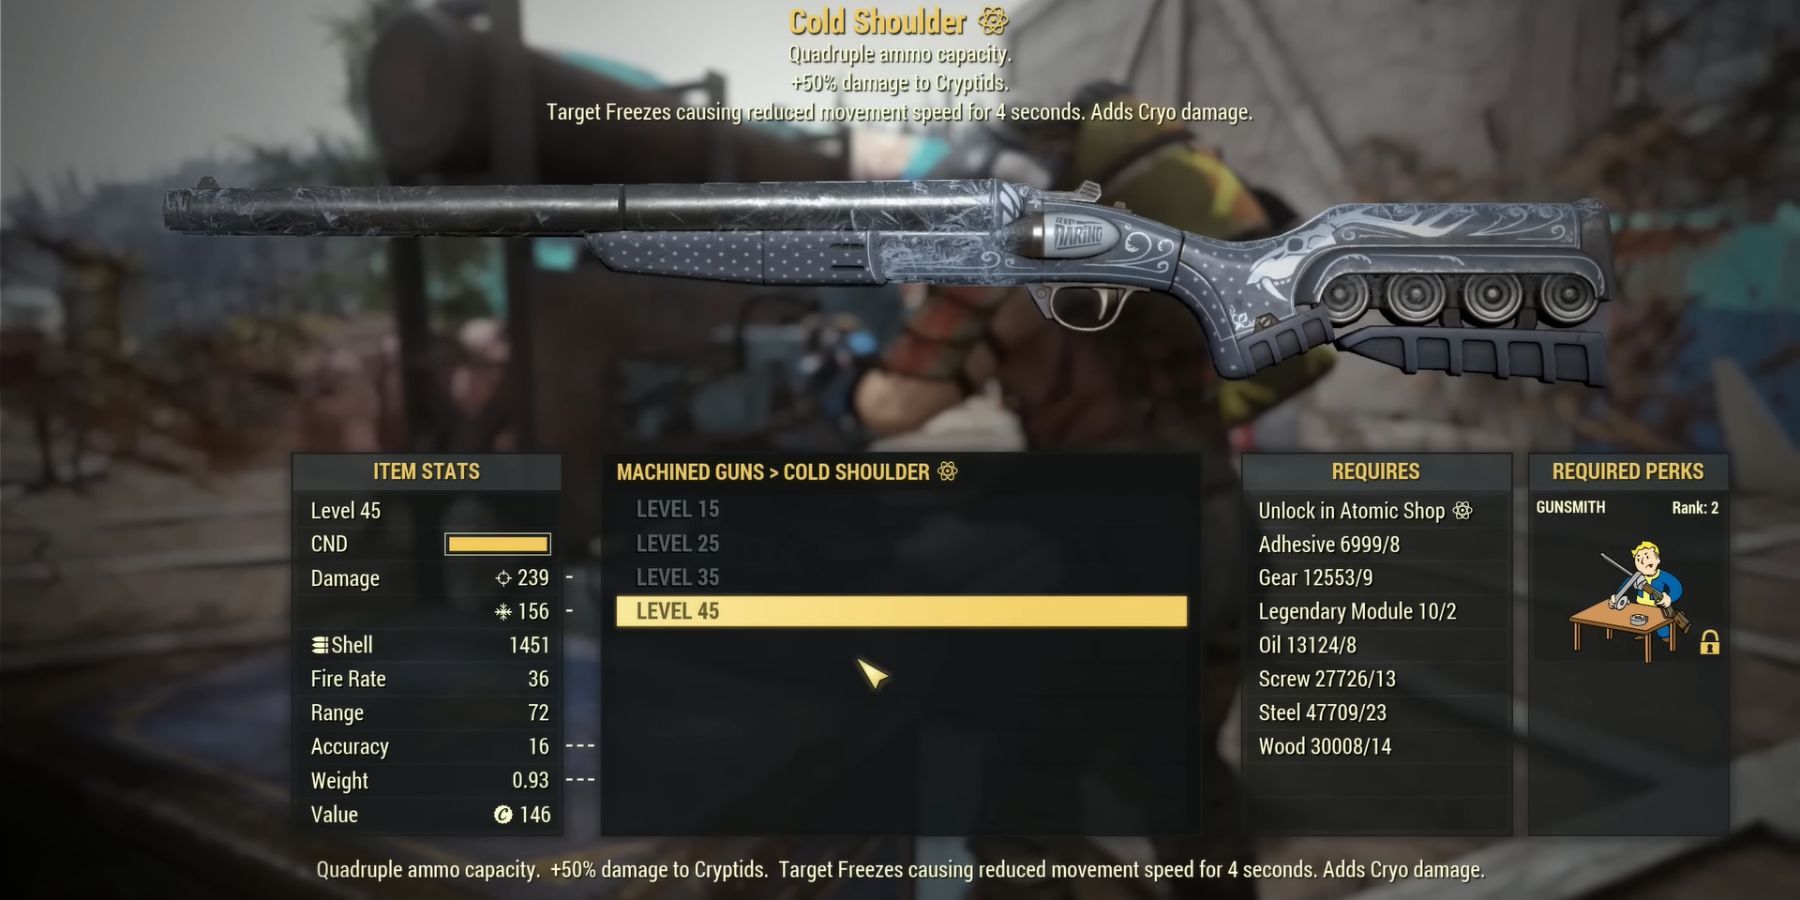 image showing how to craft the cold shoulder shotgun in fallout 76.